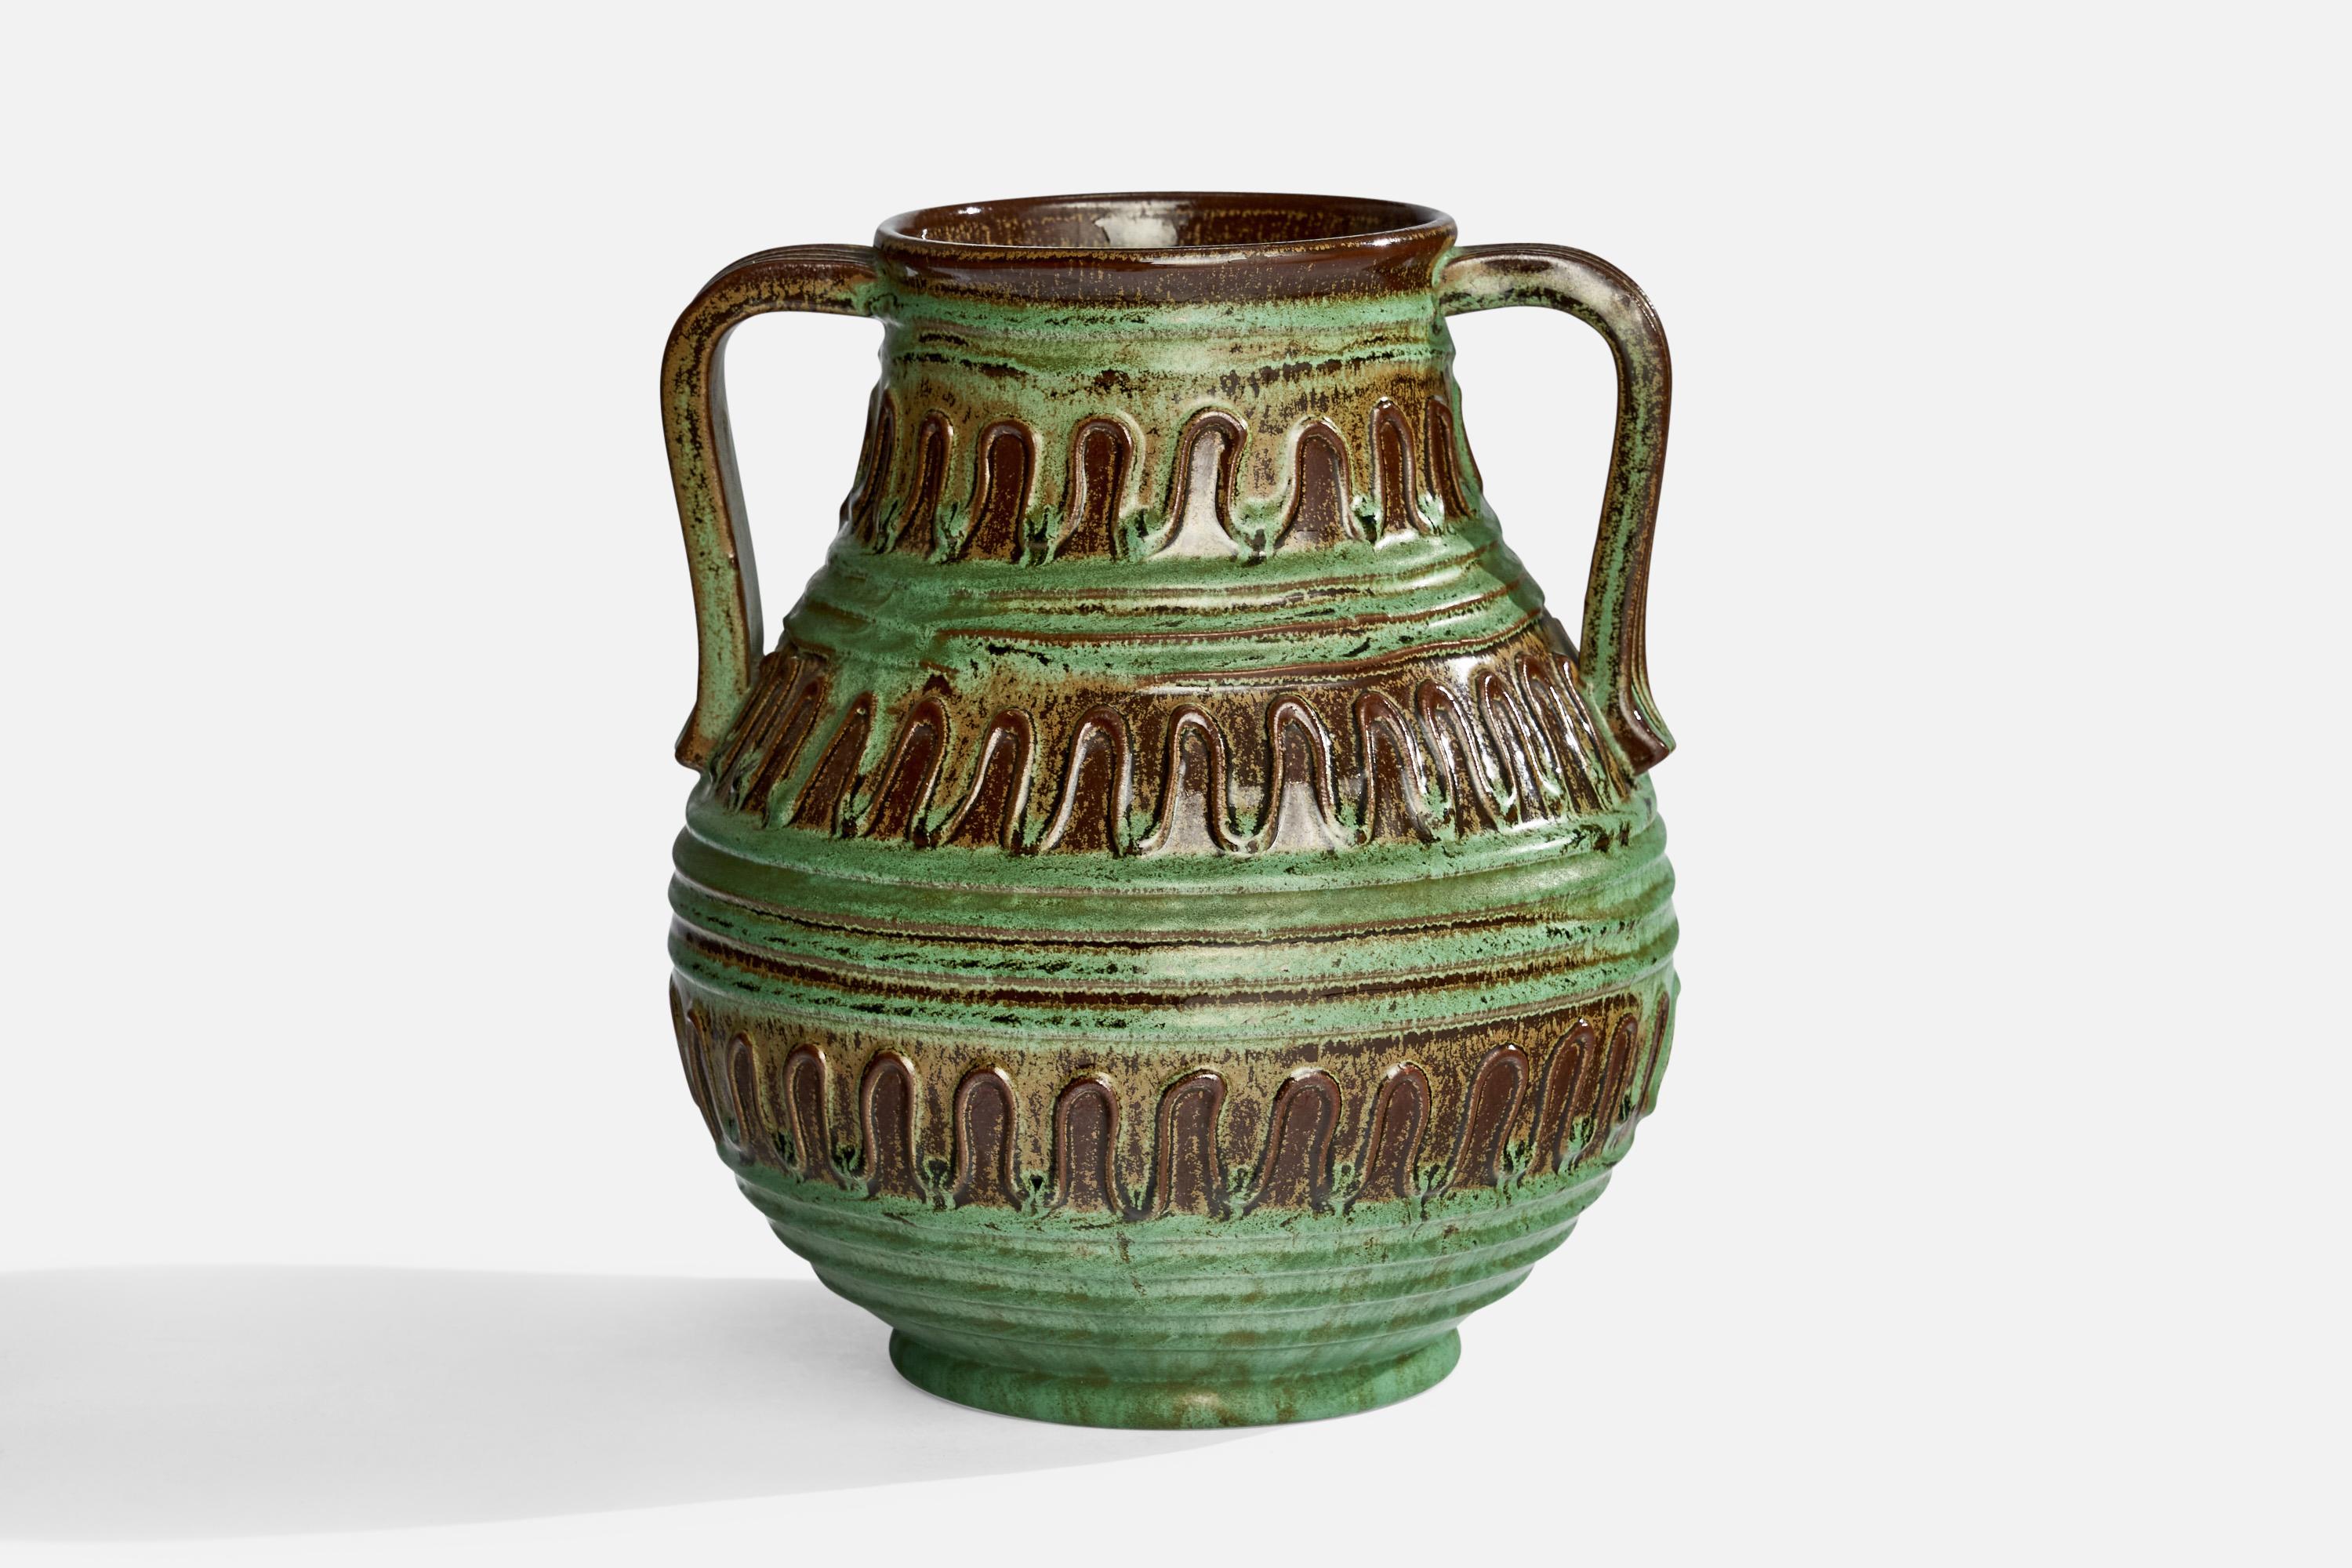 A green and brown-glazed earthenware vase designed by Erik Mornils and produced by Nittsjö, Sweden, c. 1930s.